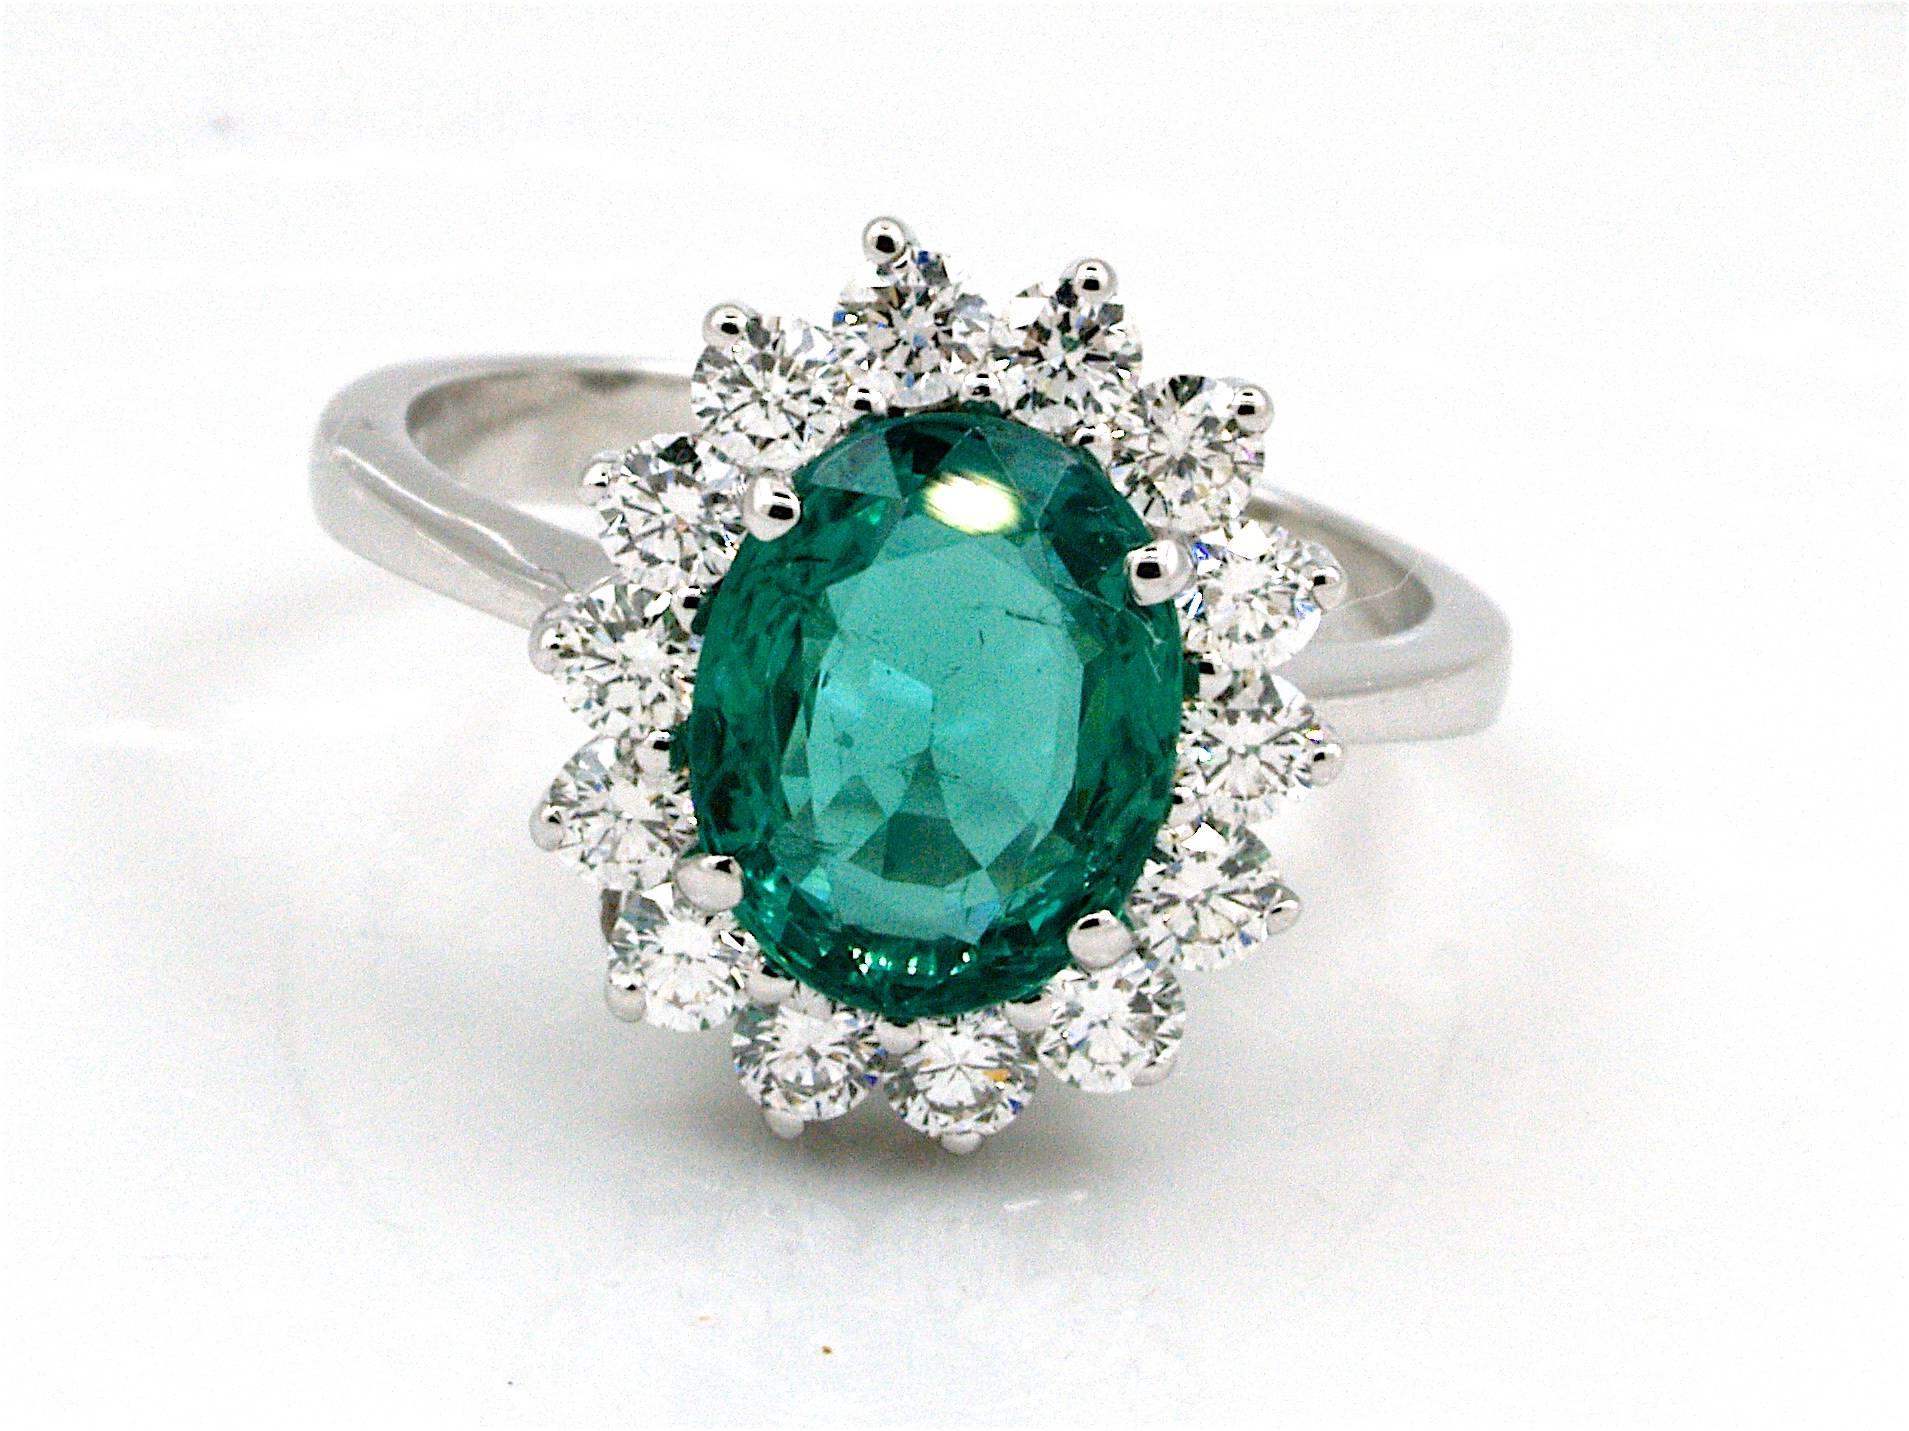 This gorgeous ring is centered with 1 genuine Oval cut emerald weighting 2 ct, prong set,  It is flanked by a row air of brilliants cut diamonds weighing 0.75 cts, graded F-G-H color and VVS-VS clarity. This beautifull ring is new.

This emerald is